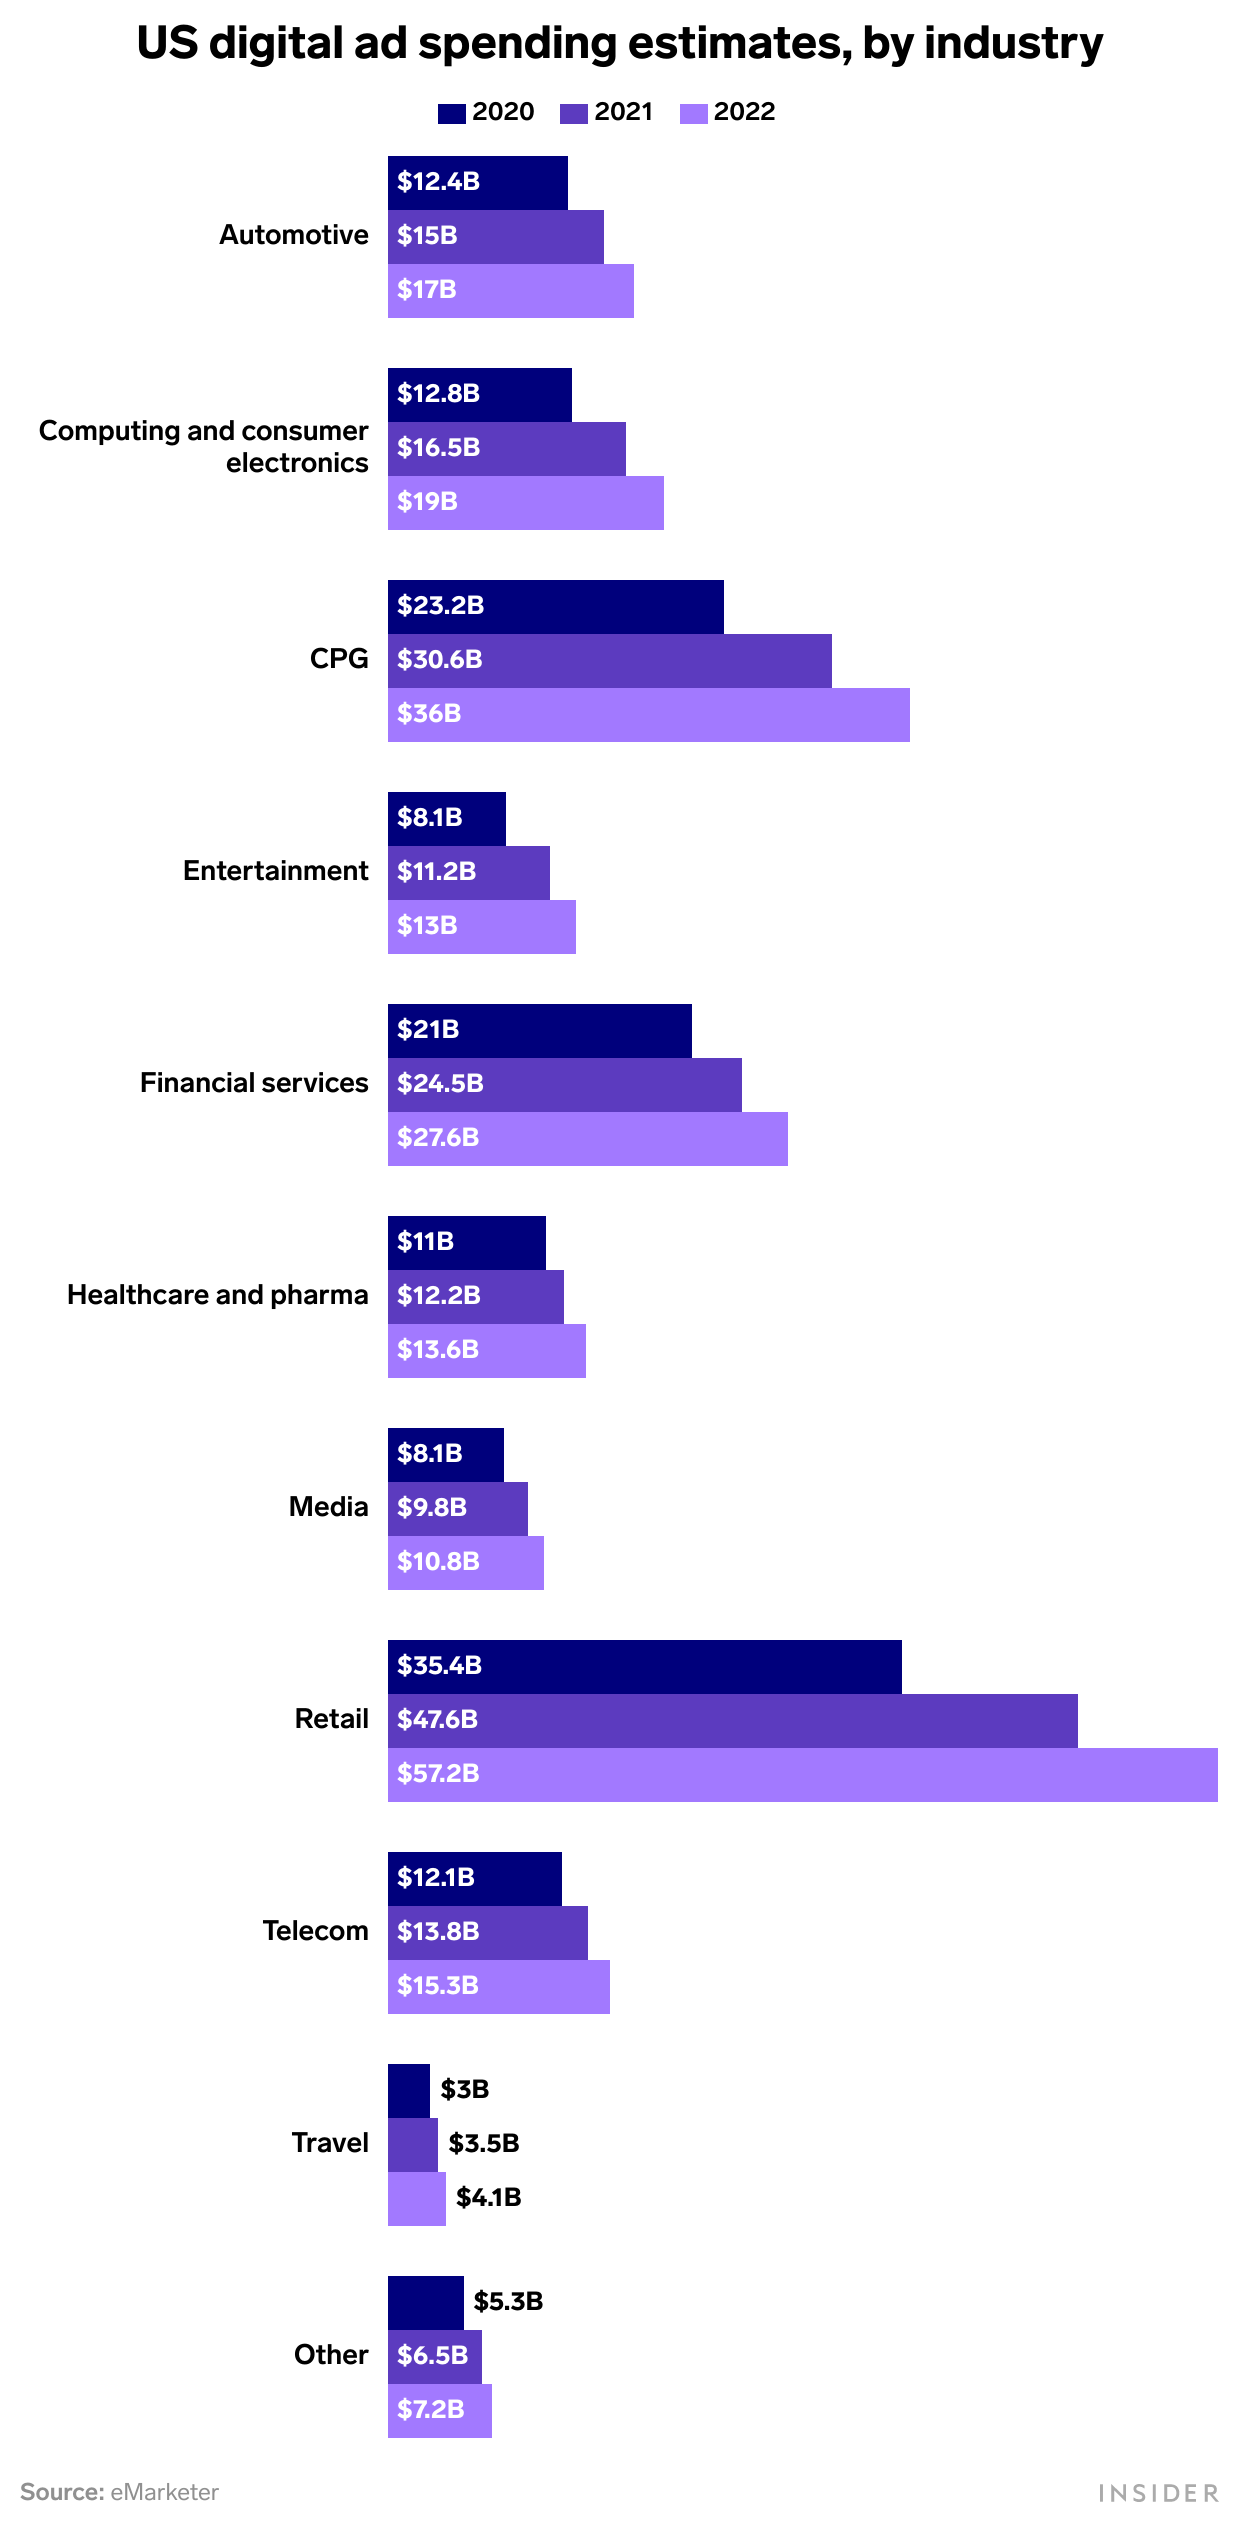 Stacked bar chart of digital ad spending estimates shown over 2019, 2020, and 2021